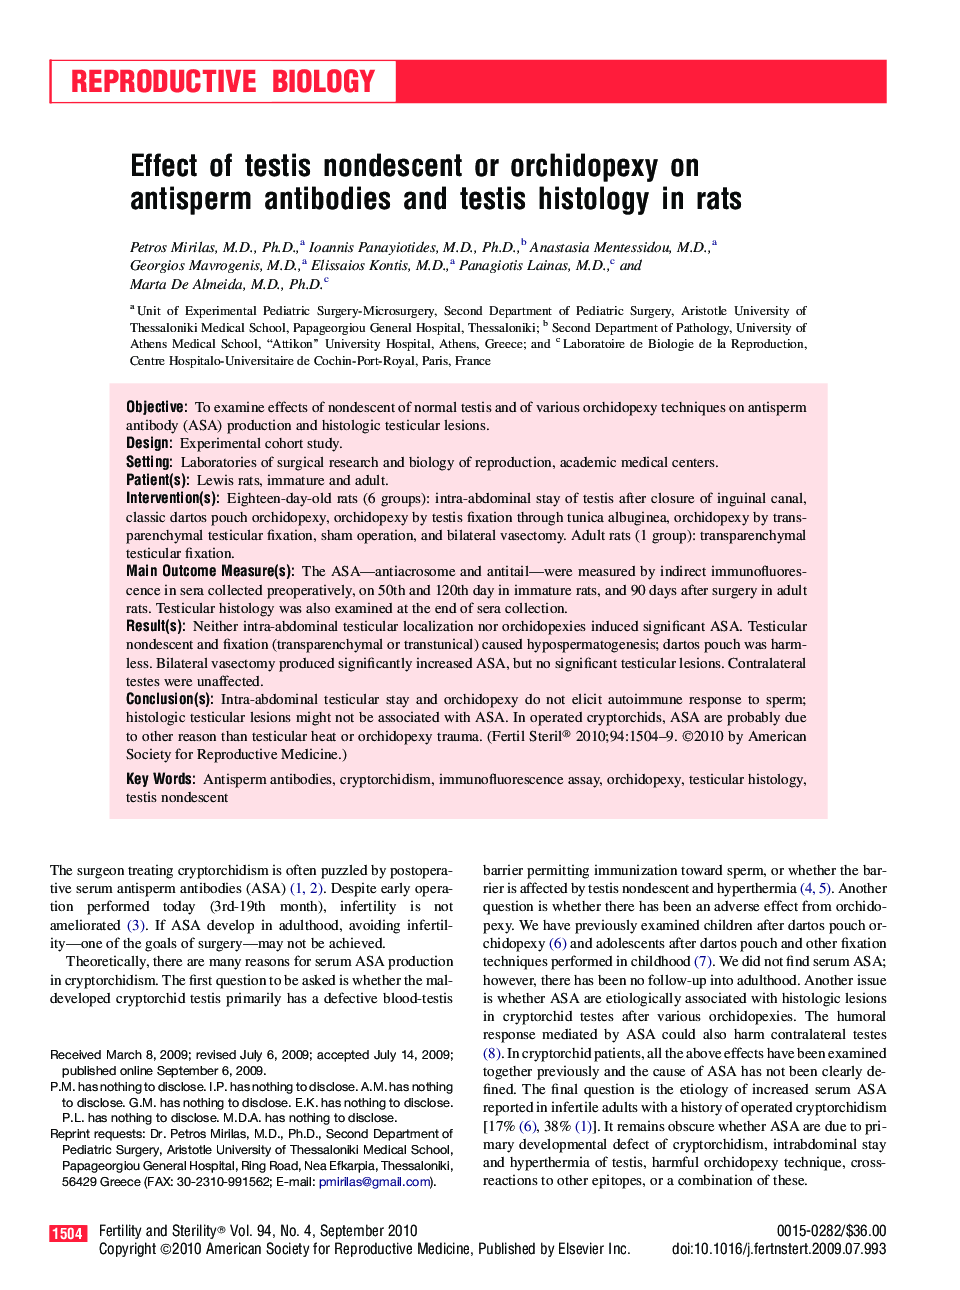 Effect of testis nondescent or orchidopexy on antisperm antibodies and testis histology in rats 